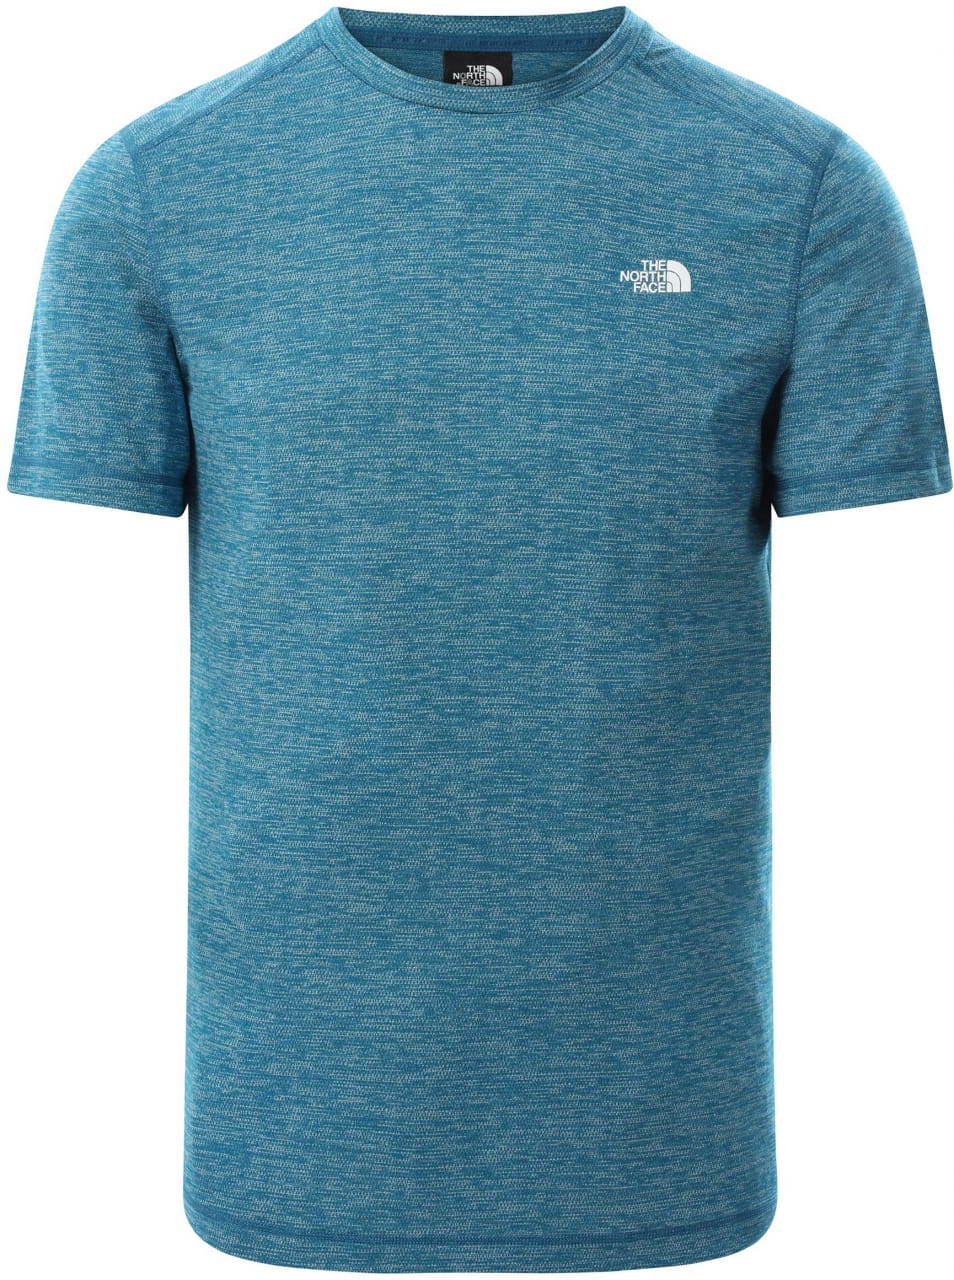 T-Shirts The North Face Men’s Lightning S/S Tee